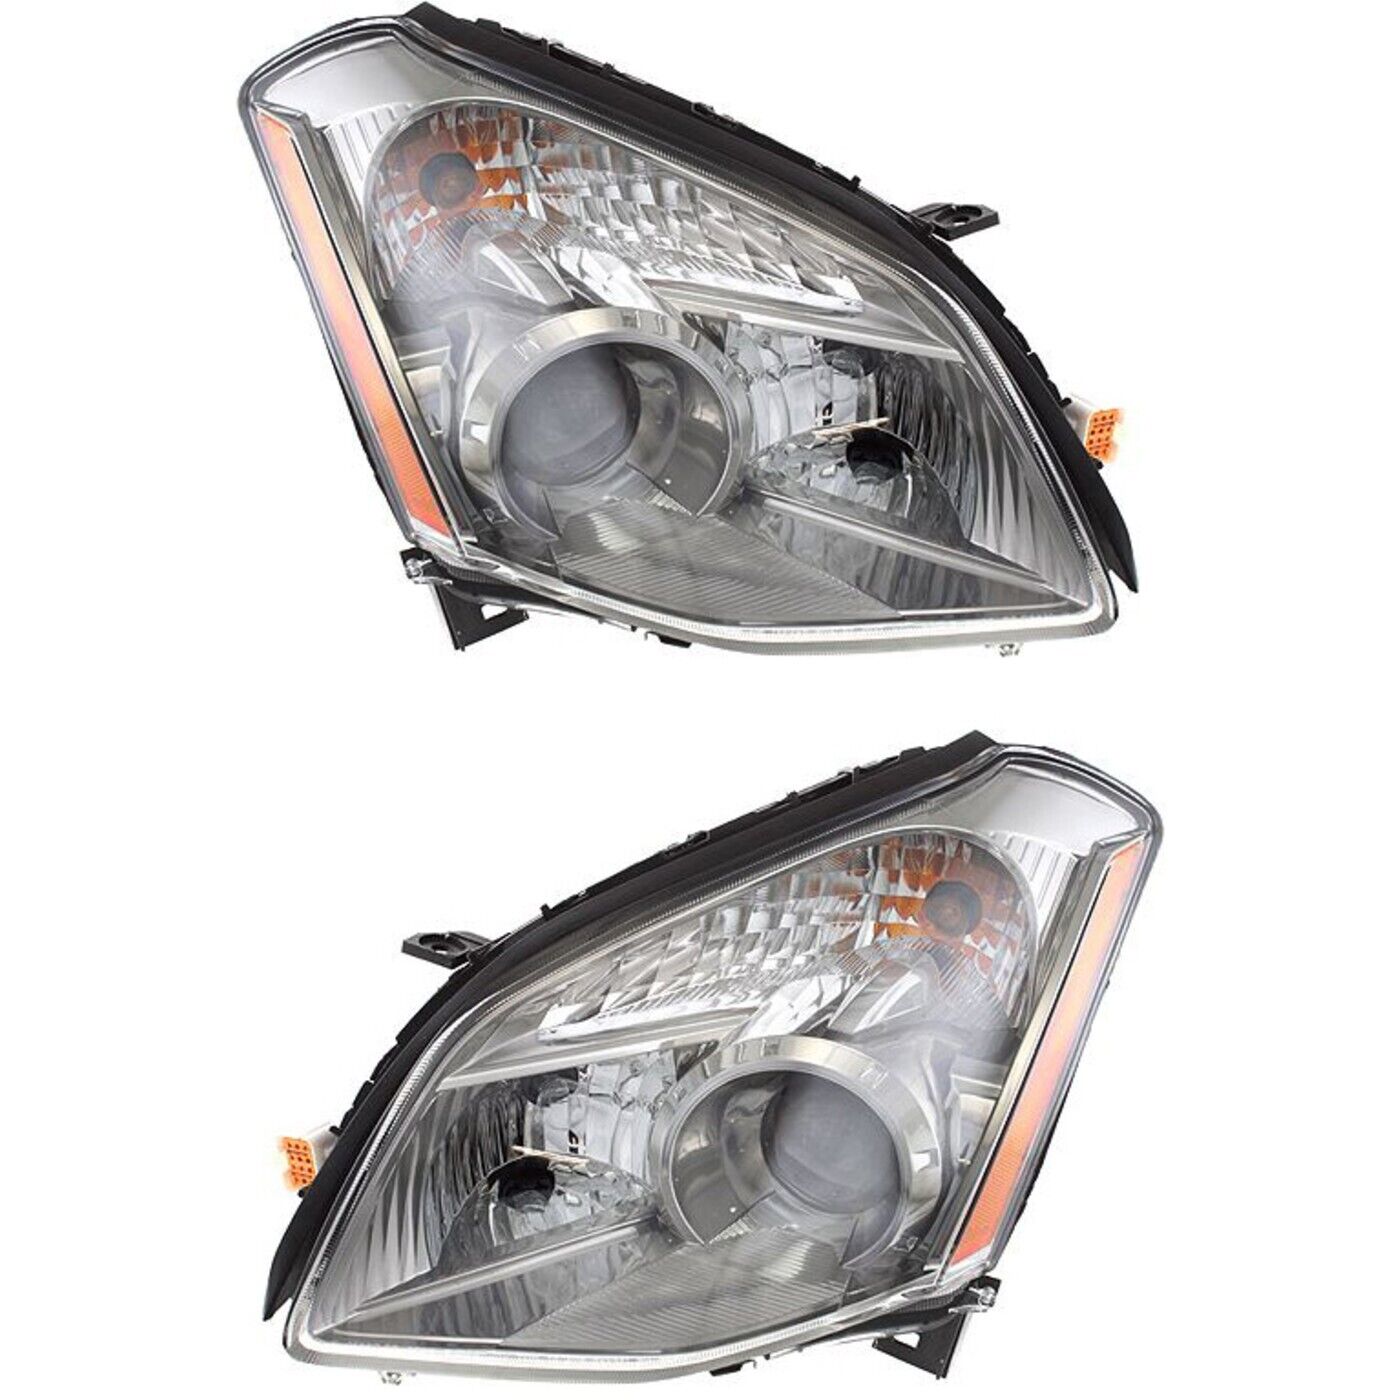 Headlight Assembly Set For 2007-08 Nissan Maxima Left Right Composite With Bulb